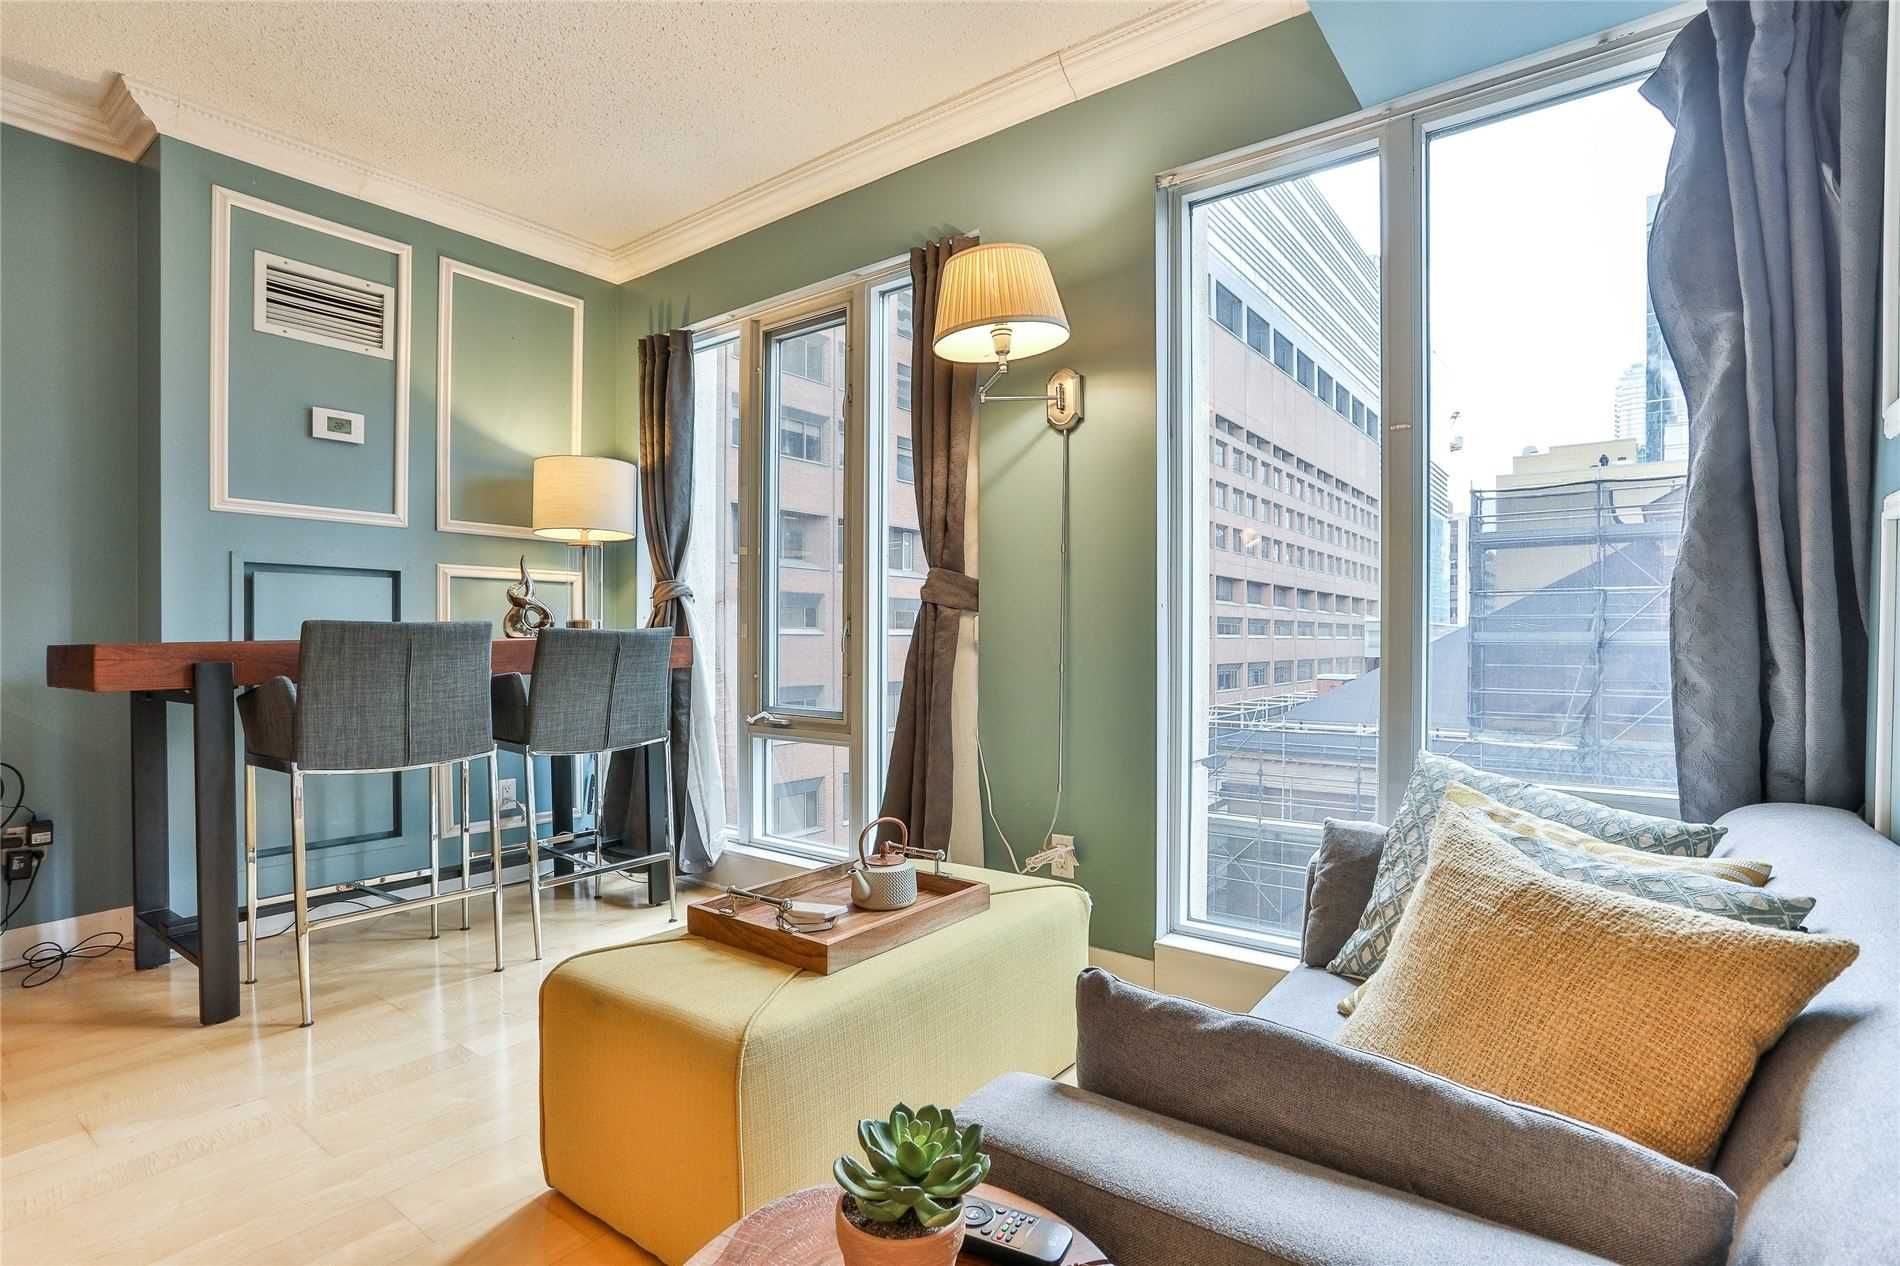 I have sold a property at 615 210 Victoria ST in Toronto
